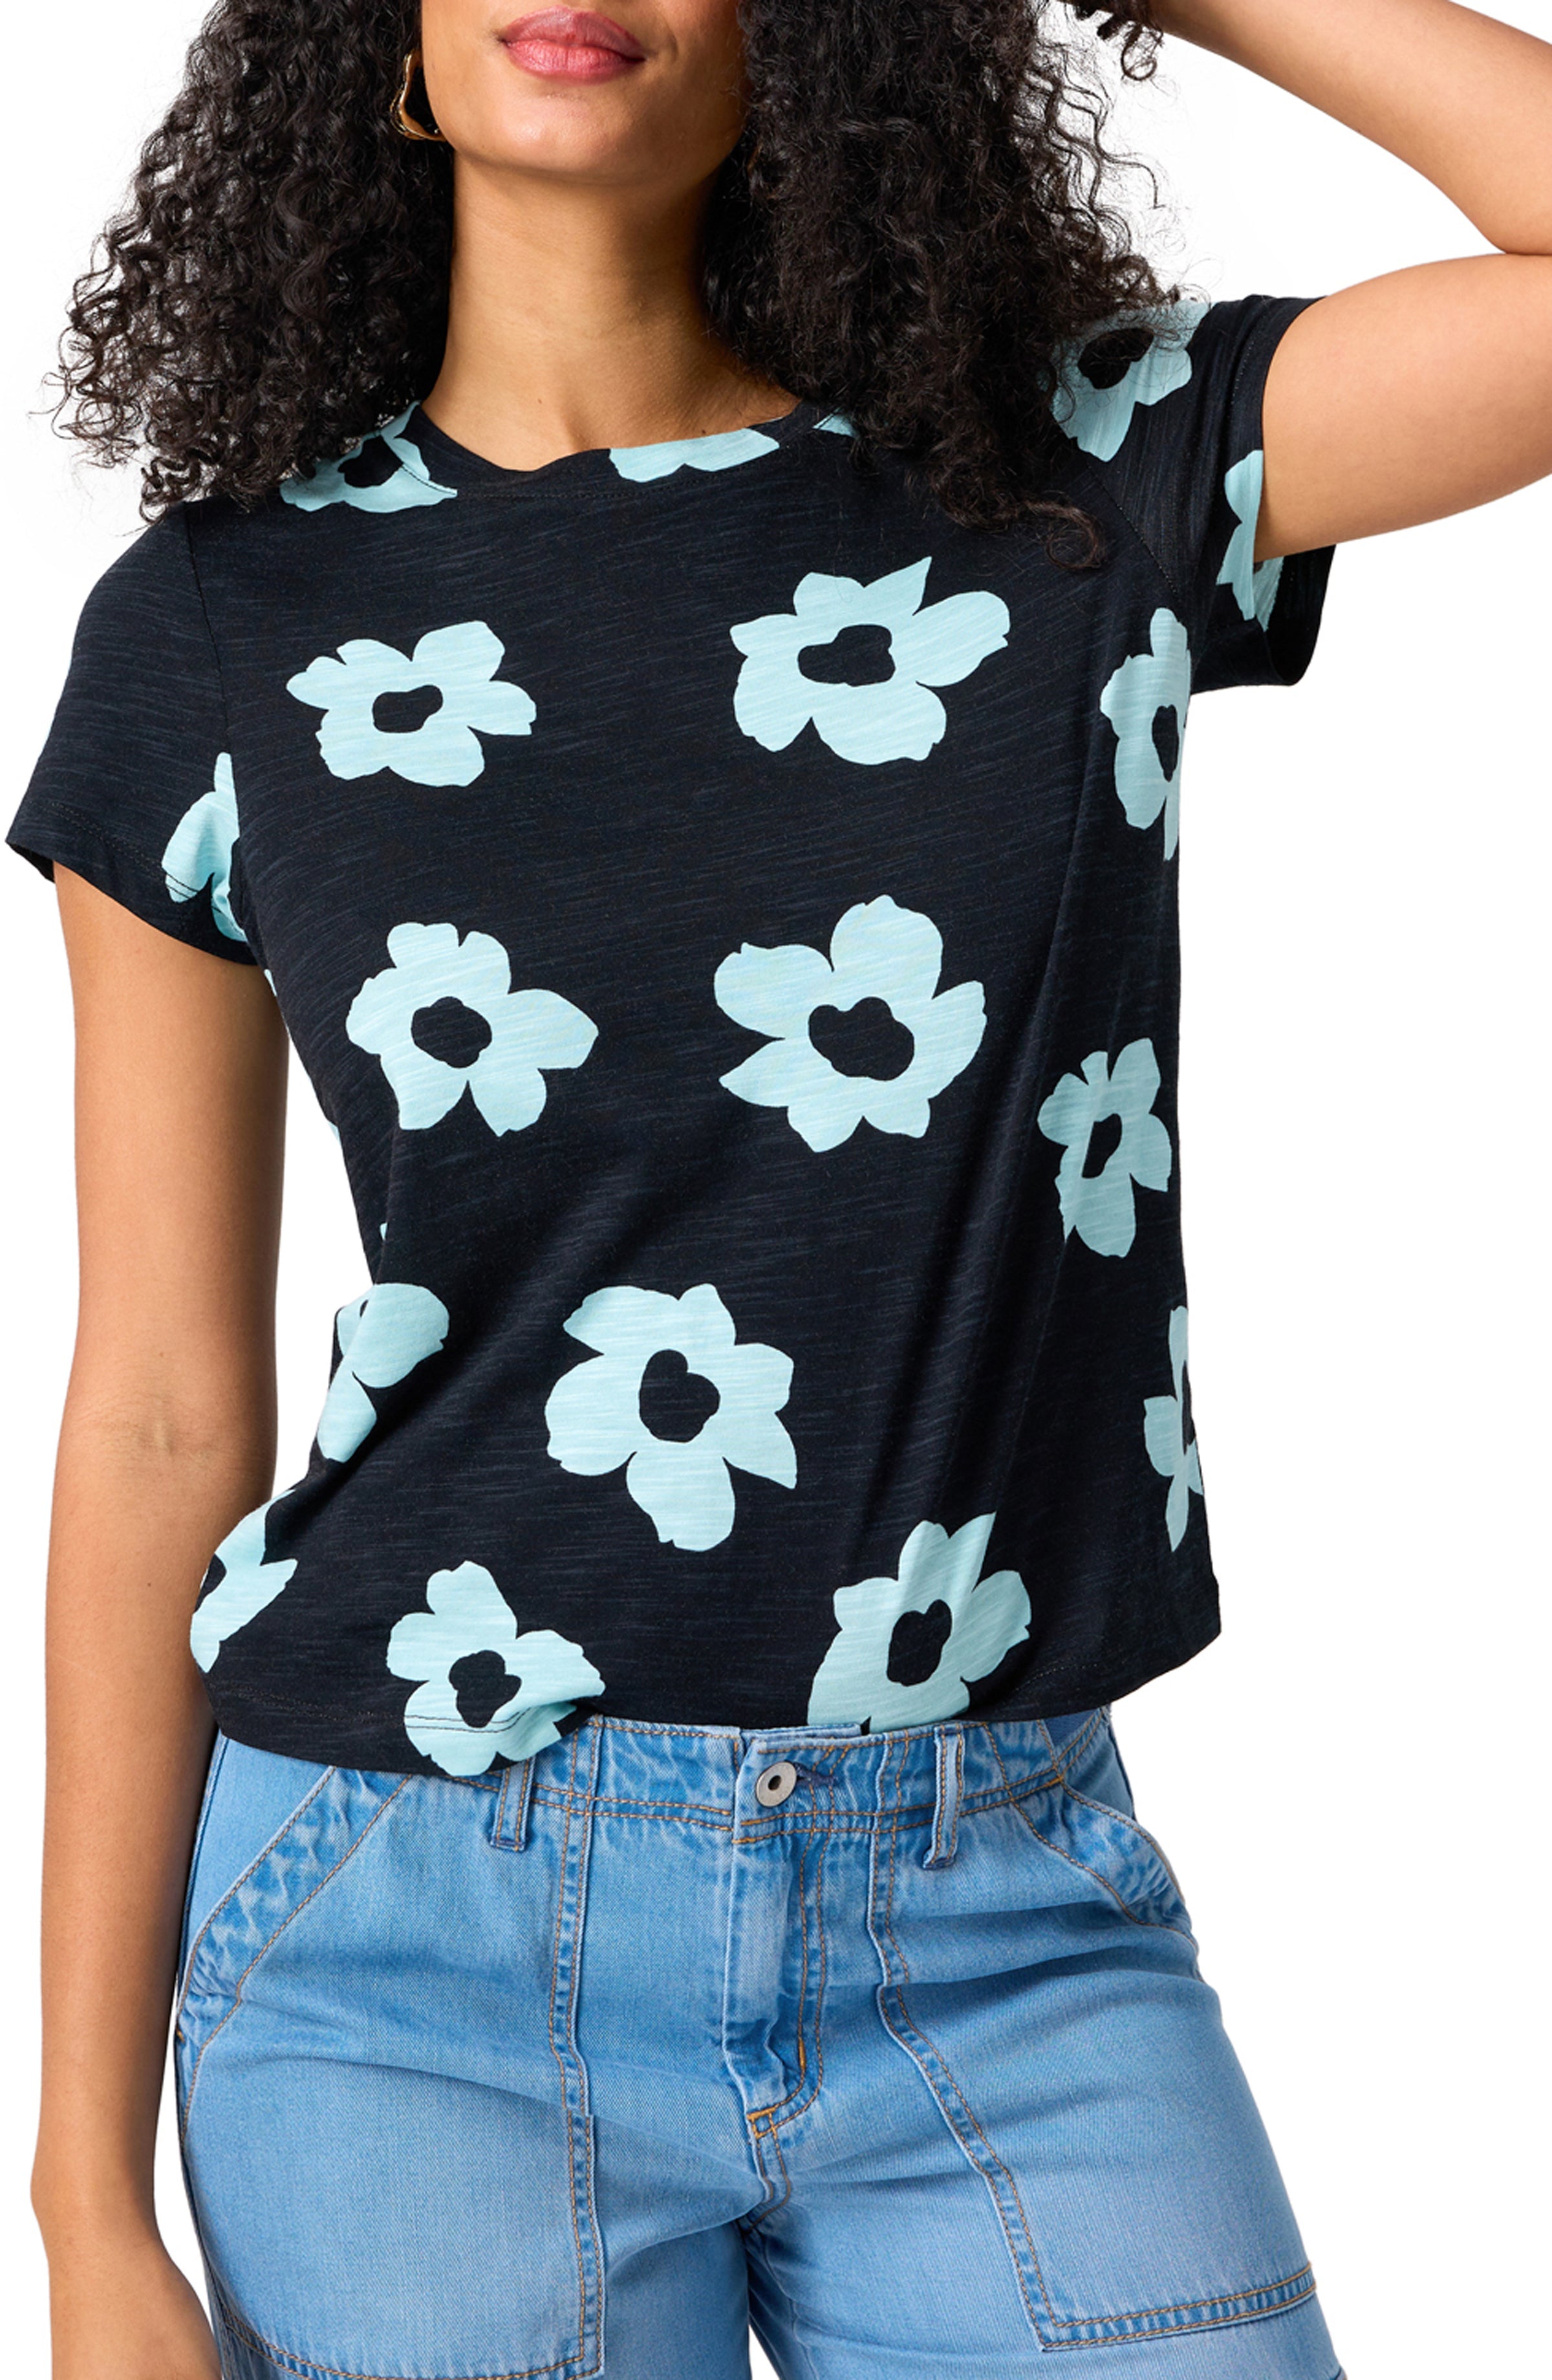 Sanctuary Perfect Tee - Aqua Flower Pop Clothing - Tops - Shirts - SS Knits by Sanctuary | Grace the Boutique